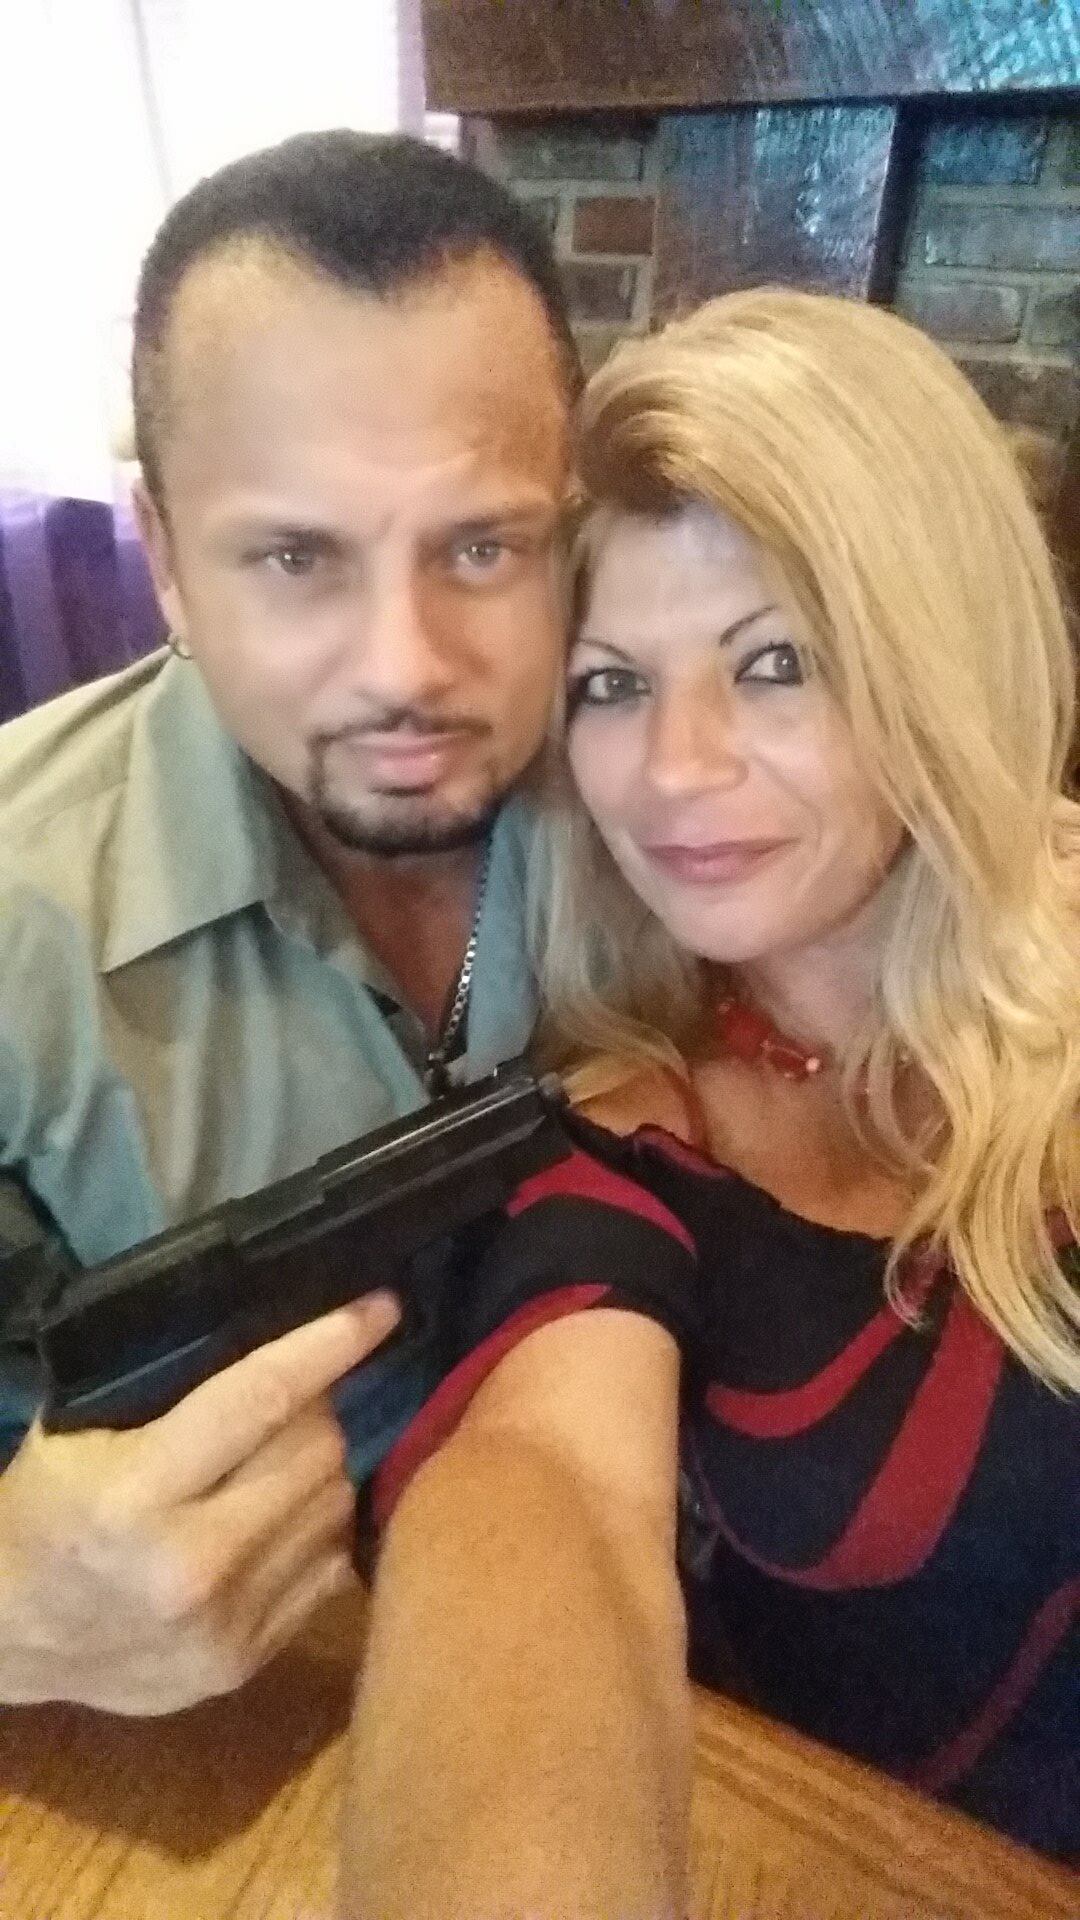 Raul Santiago Colon (Actor) and Joanne Marinho (Actress) on set for the movie 